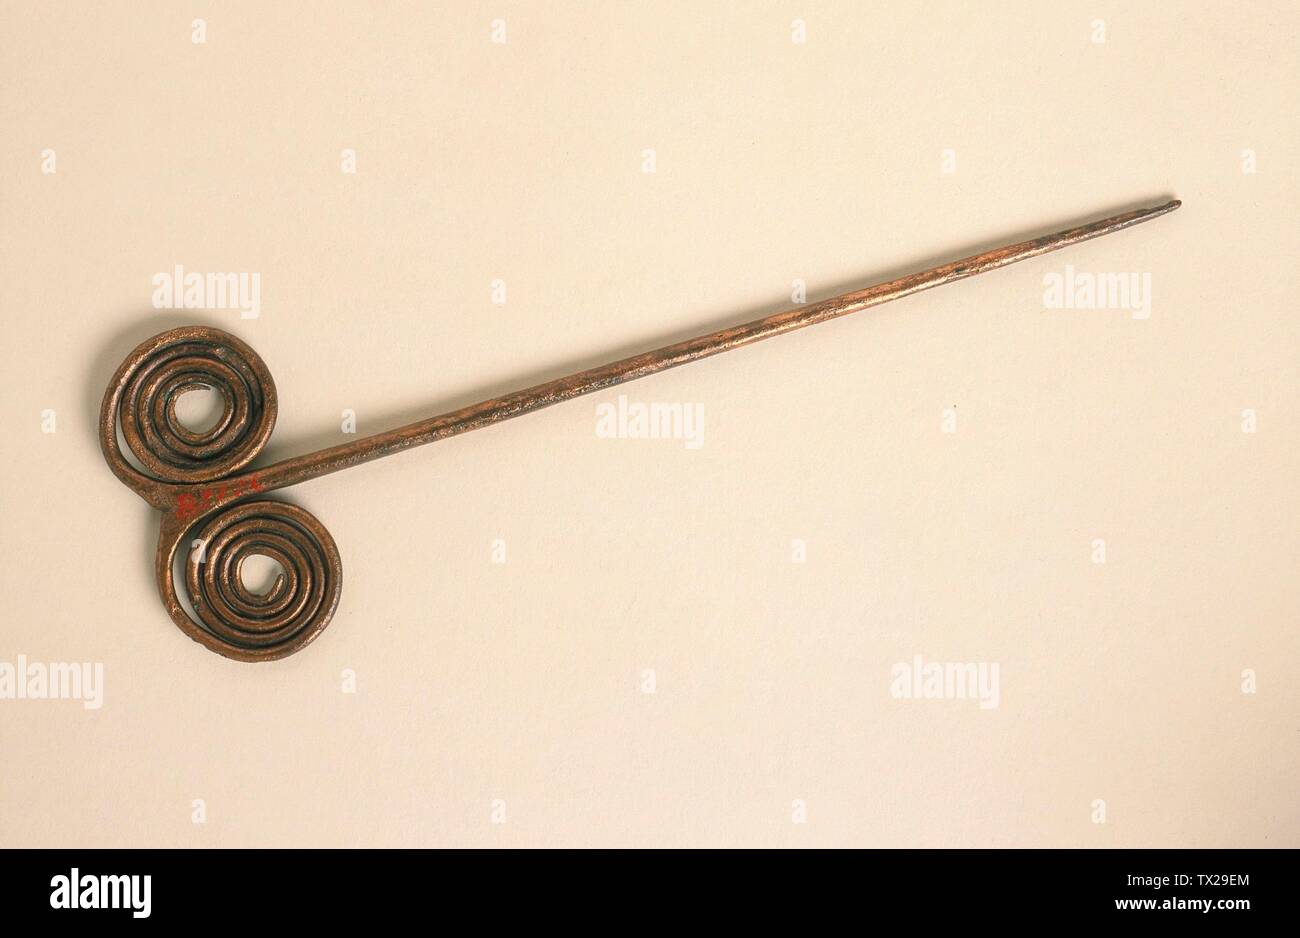 Double-Spiral Pin; Eastern Europe, Chalcolithic period, circa 5000 B.C. Jewelry and Adornments; pins Copper, hammered 7 5/8 x 2 3/8 in. (19.4 x 6.2 cm) The Nasli M. Heeramaneck Collection of Ancient Near Eastern and Central Asian Art, gift of The Ahmanson Foundation (M.76.97.672) Art of the Ancient Near East; circa 5000 date QS:P571,+5000-00-00T00:00:00Z/9,P1480,Q5727902 B.C.; Stock Photo